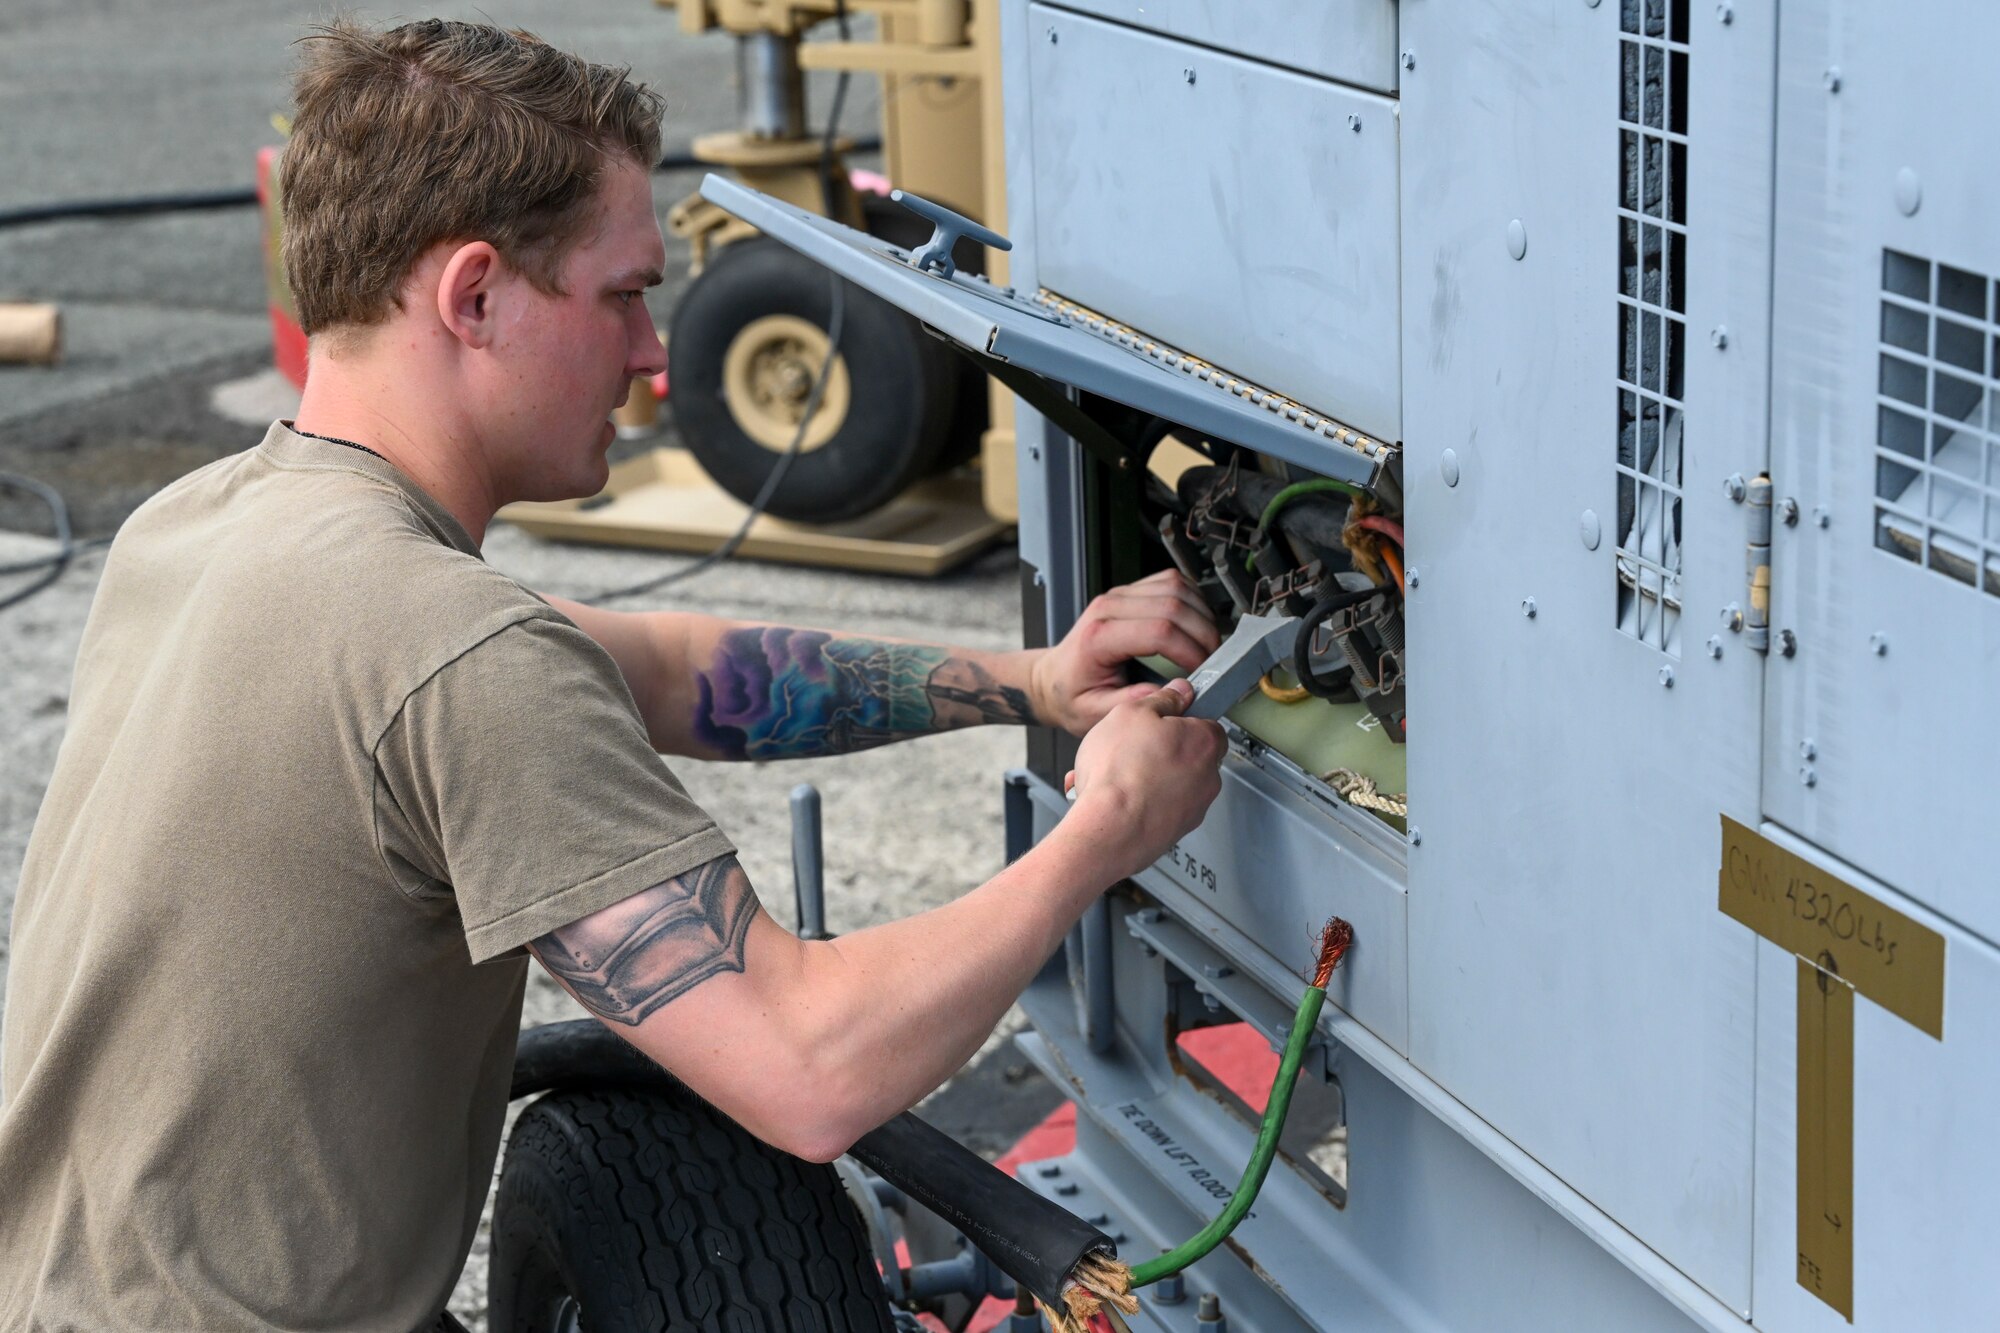 Staff Sgt. Colton Neal, 49th Aircraft Maintenance Squadron MQ-9 ground control station supervisor, wires equipment to a generator, Sept. 11, 2021, on Marine Corps Base Hawaii. Generators were used to power a ground control station, a containerized dual control segment, and multiple ground data terminals. (U.S. Air Force photo by Airman 1st Class Adrian Salazar)